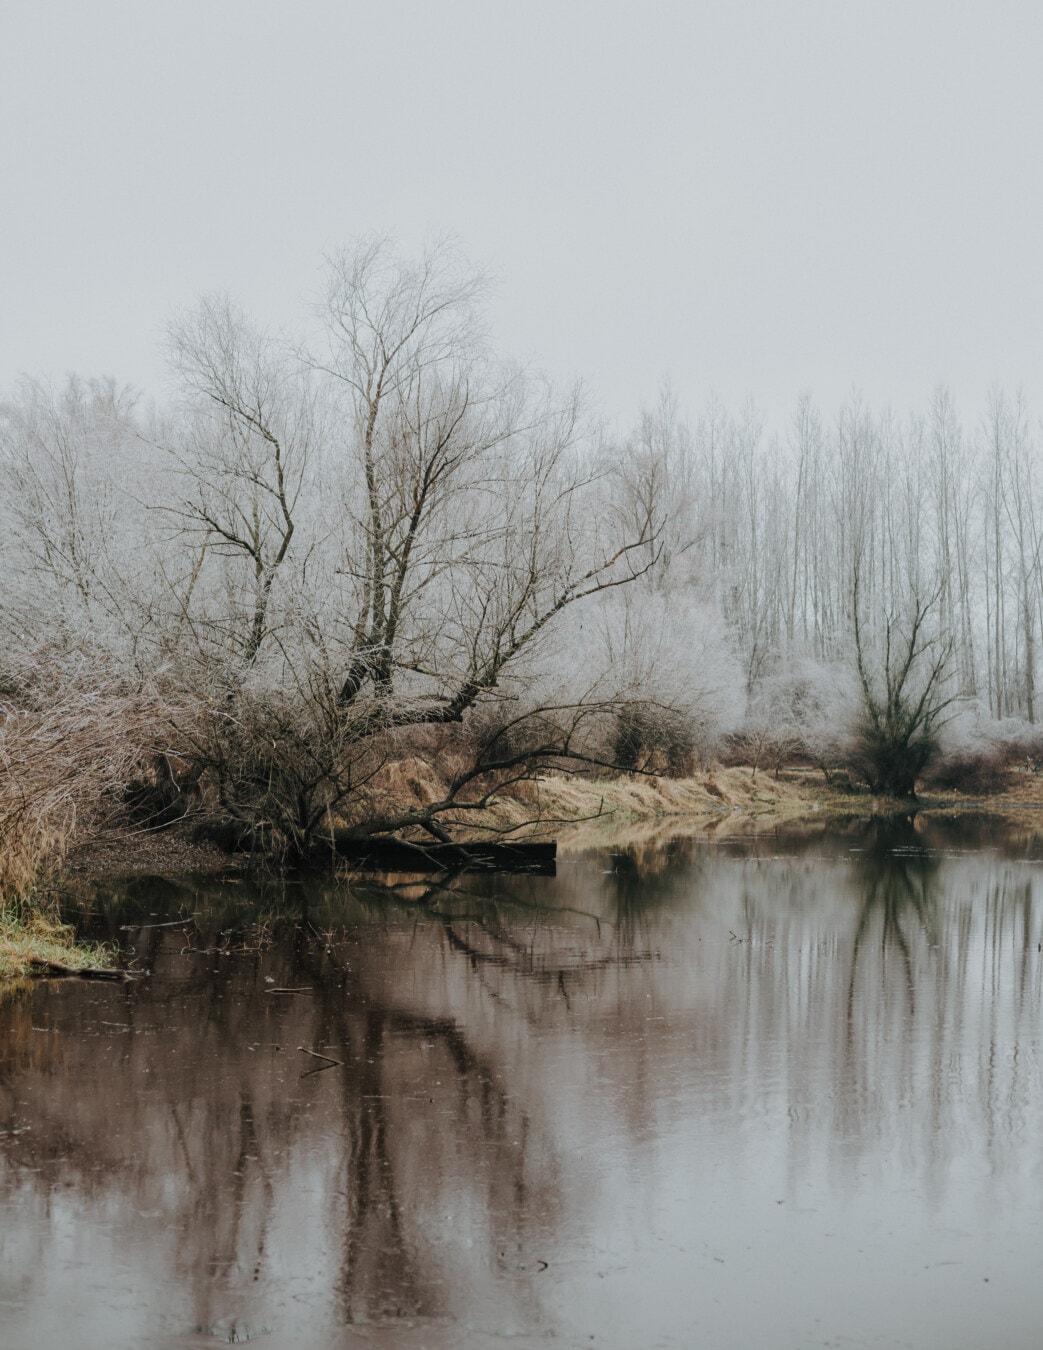 mist, winter, cold water, foggy, swamp, landscape, tree, nature, wood, water